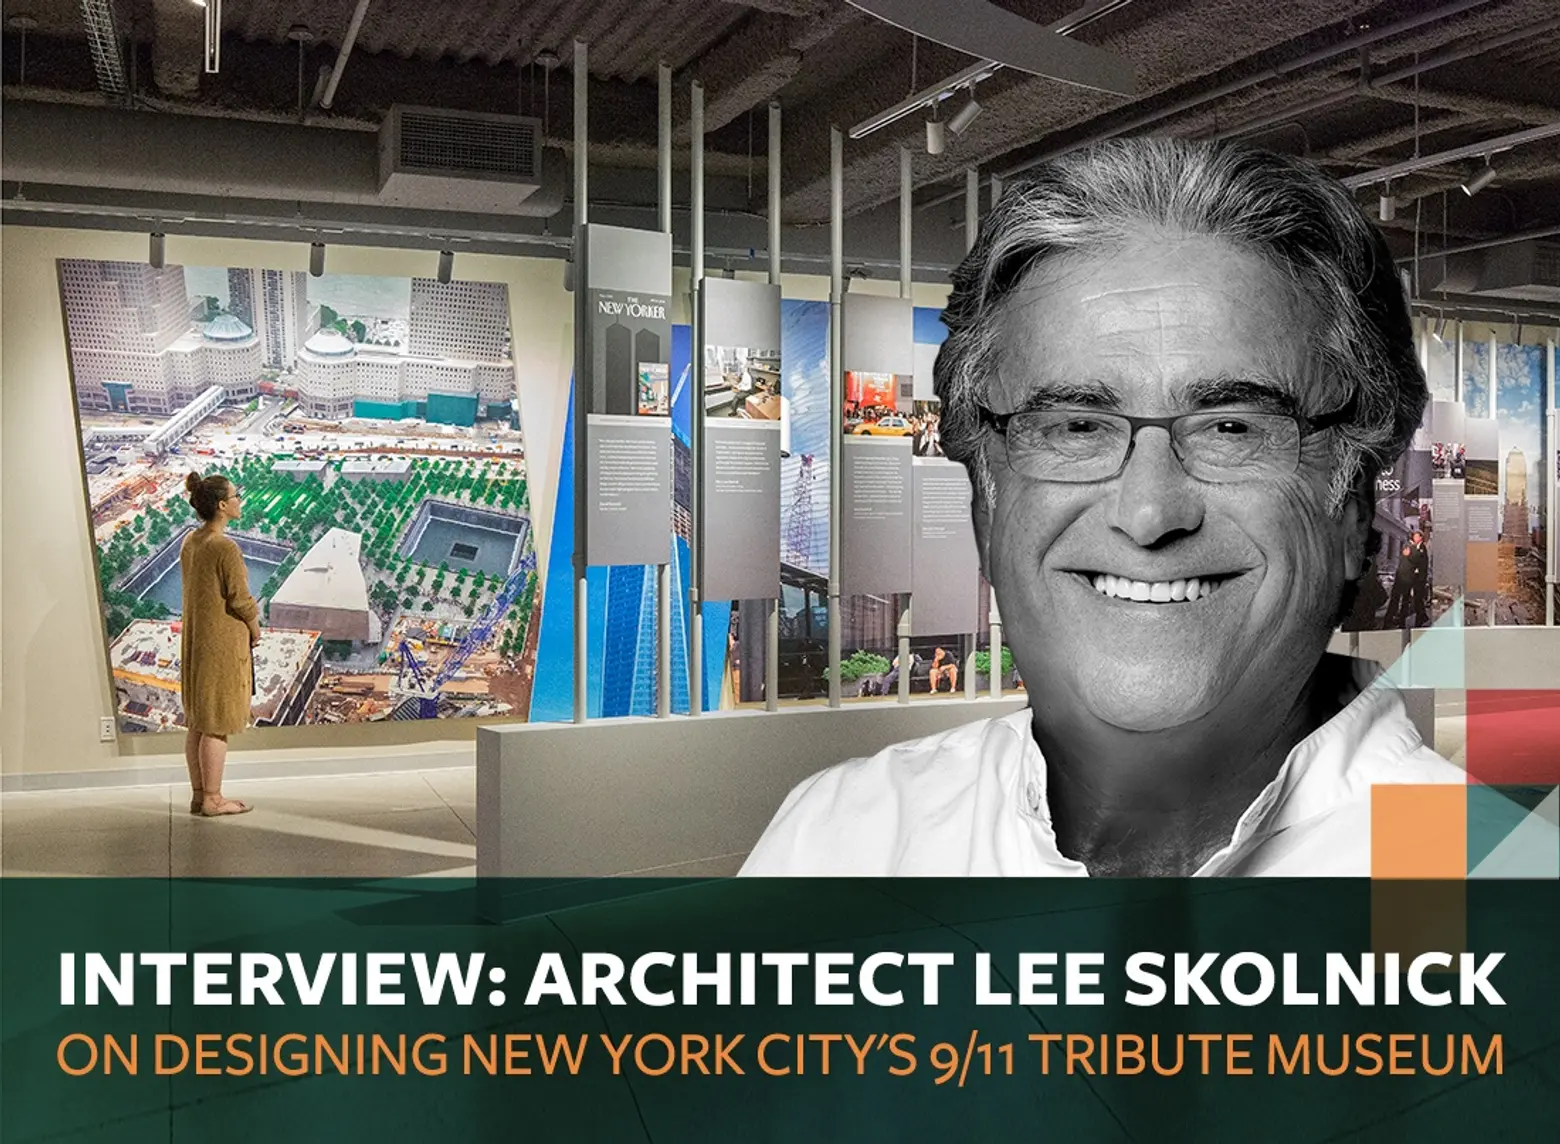 INTERVIEW: Architect Lee H. Skolnick on designing New York City’s 9/11 Tribute Museum